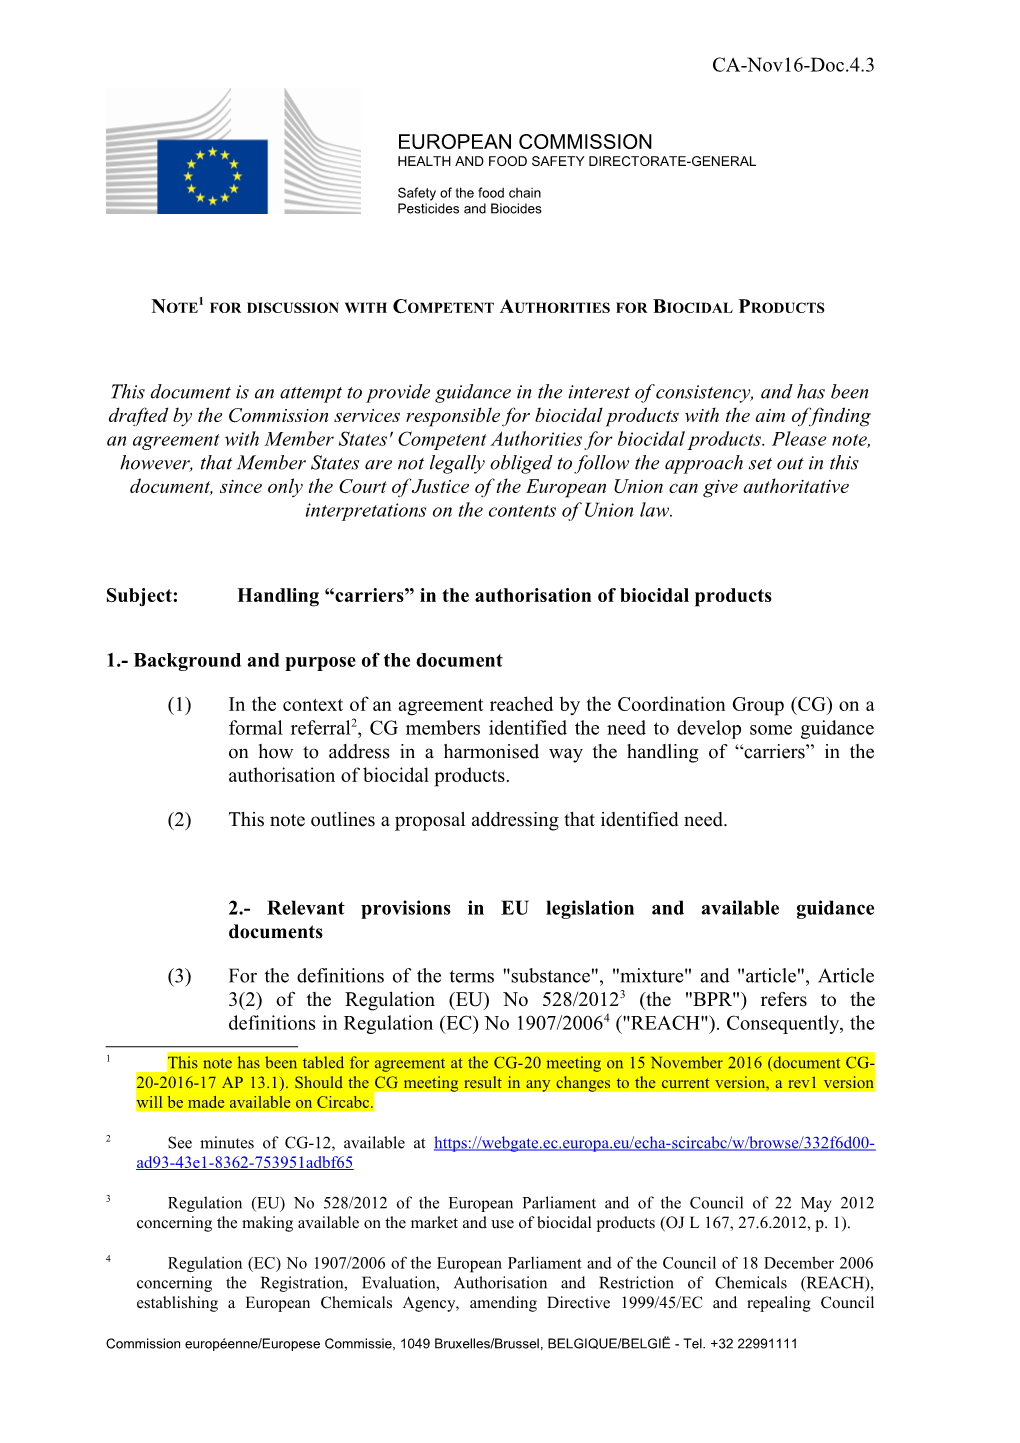 Note 1 for Discussion with Competent Authorities for Biocidal Products